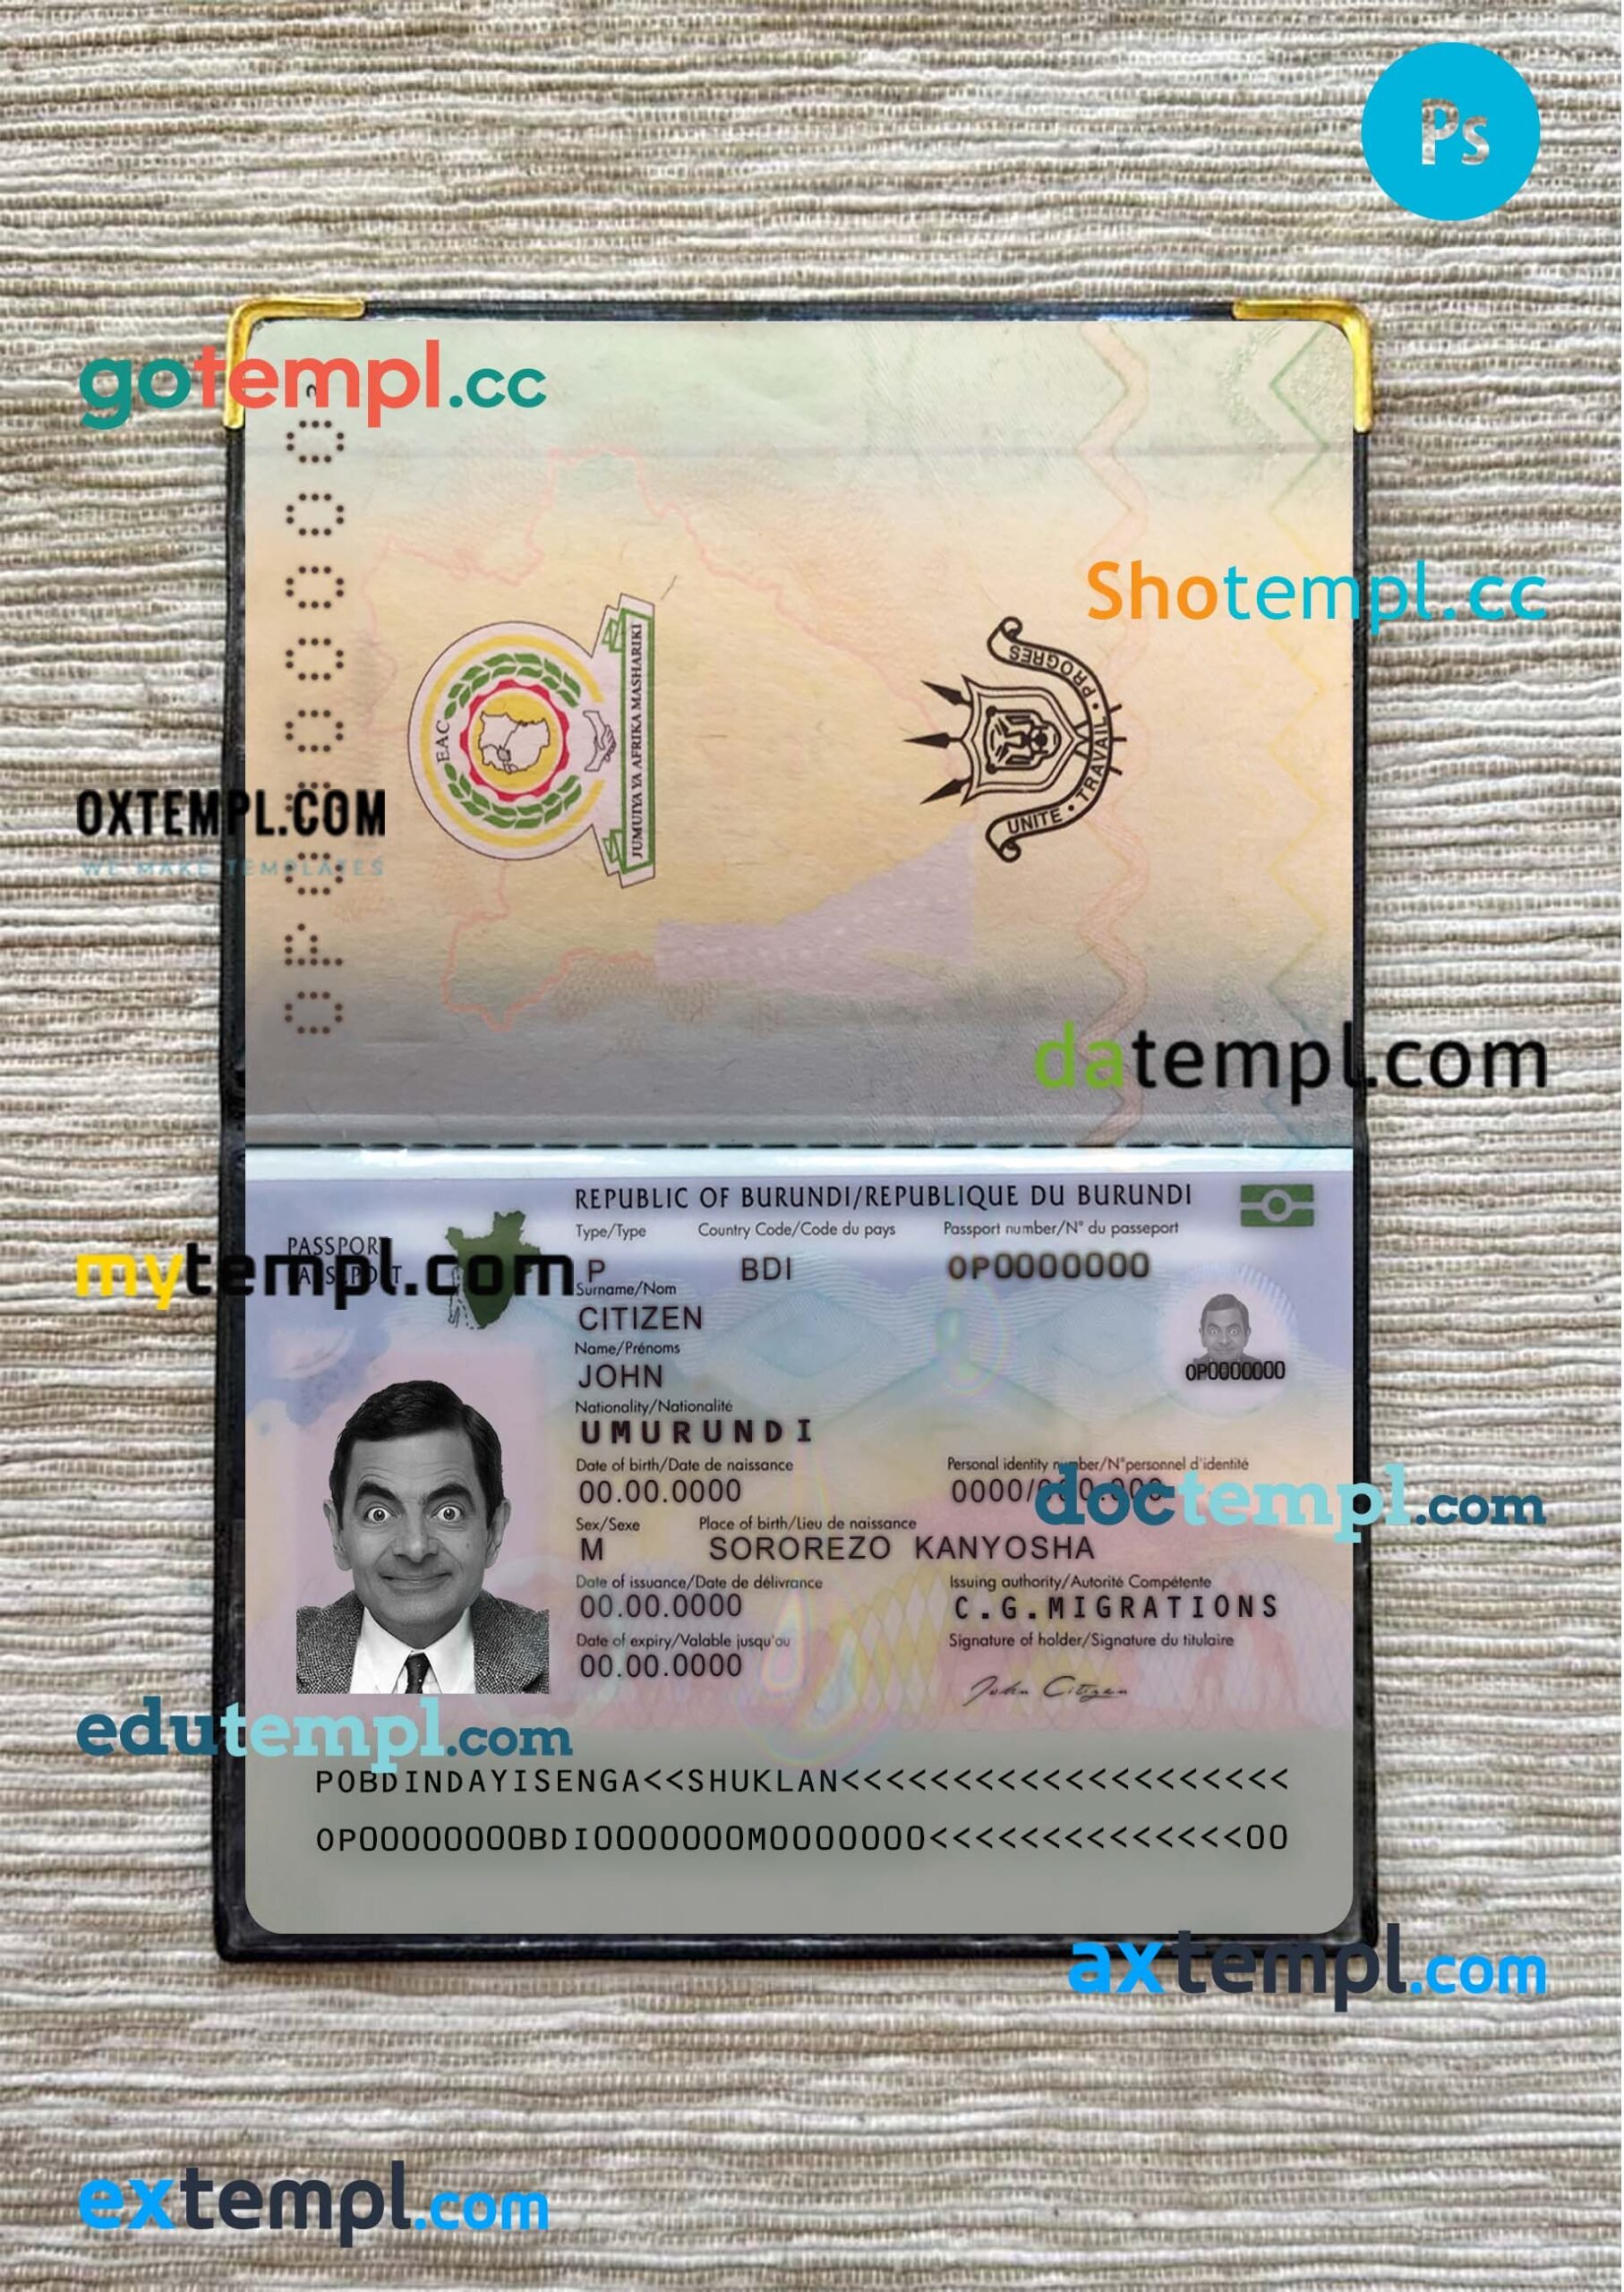 Nepal driving license PSD files, scan look and photographed image, 2 in 1